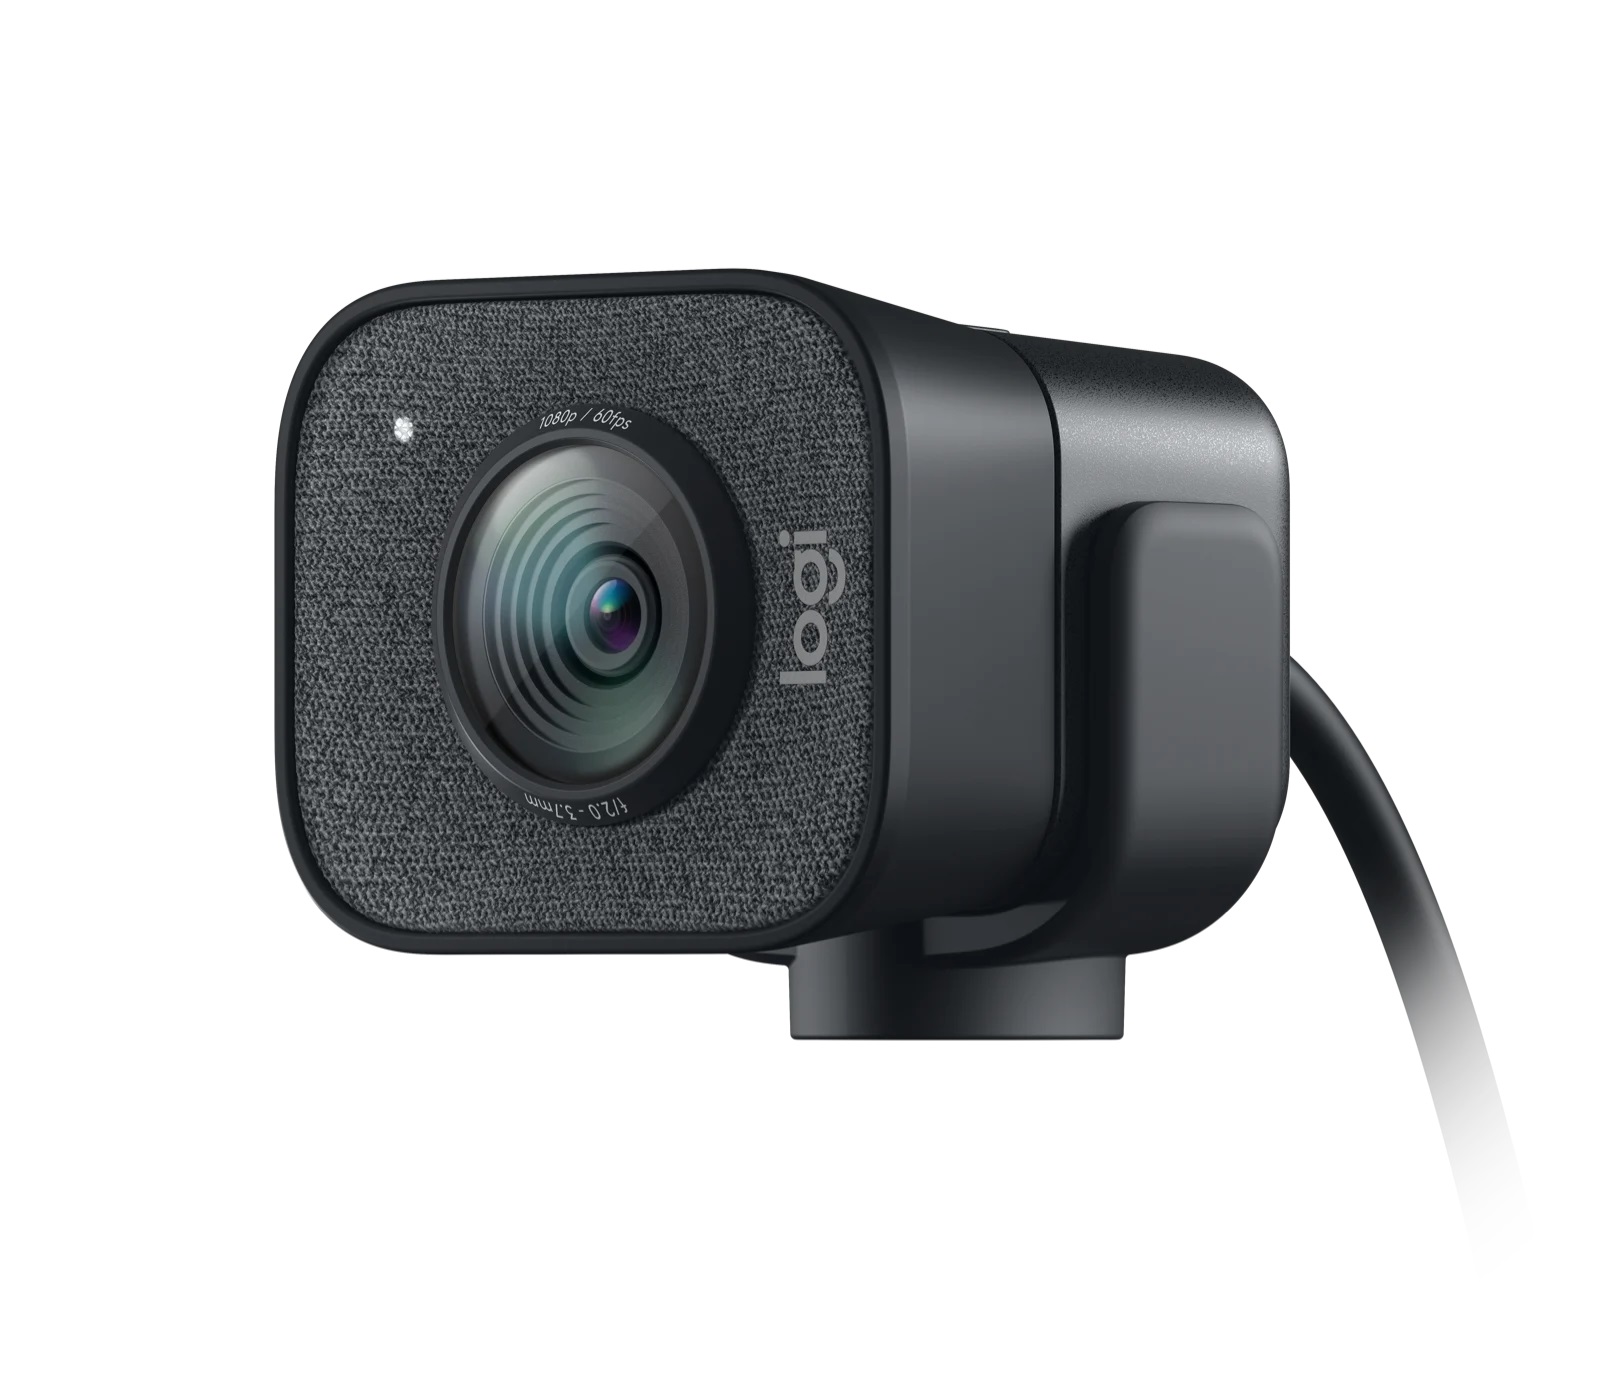 Logitech StreamCam streams and records in full HD 1080p resolution at 60 fps, delivering stunning video content